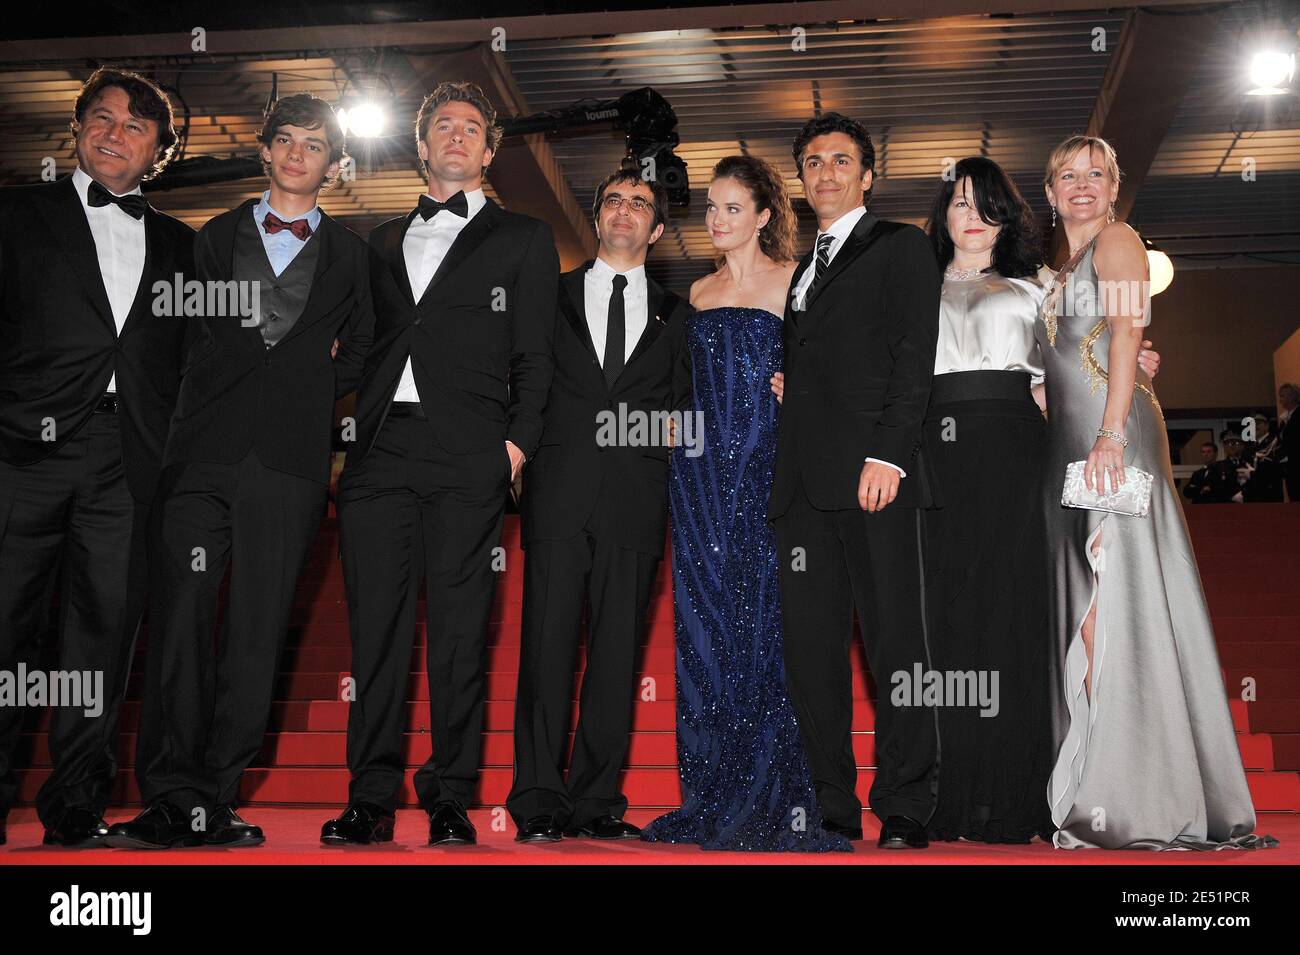 The cast of Adoration Devon Bostick, Scott Speedman, Rachel Blanchard and Atom Egoyan seen arriving at the Palais des Festivals in Cannes, Southern France, May 22, 2008, for the screening of Atom Egoyan's Adoration presented in competition at the 61st Cannes Film Festival. Photo by Hahn-Nebinger-Orban/ABACAPRESS.COM Stock Photo